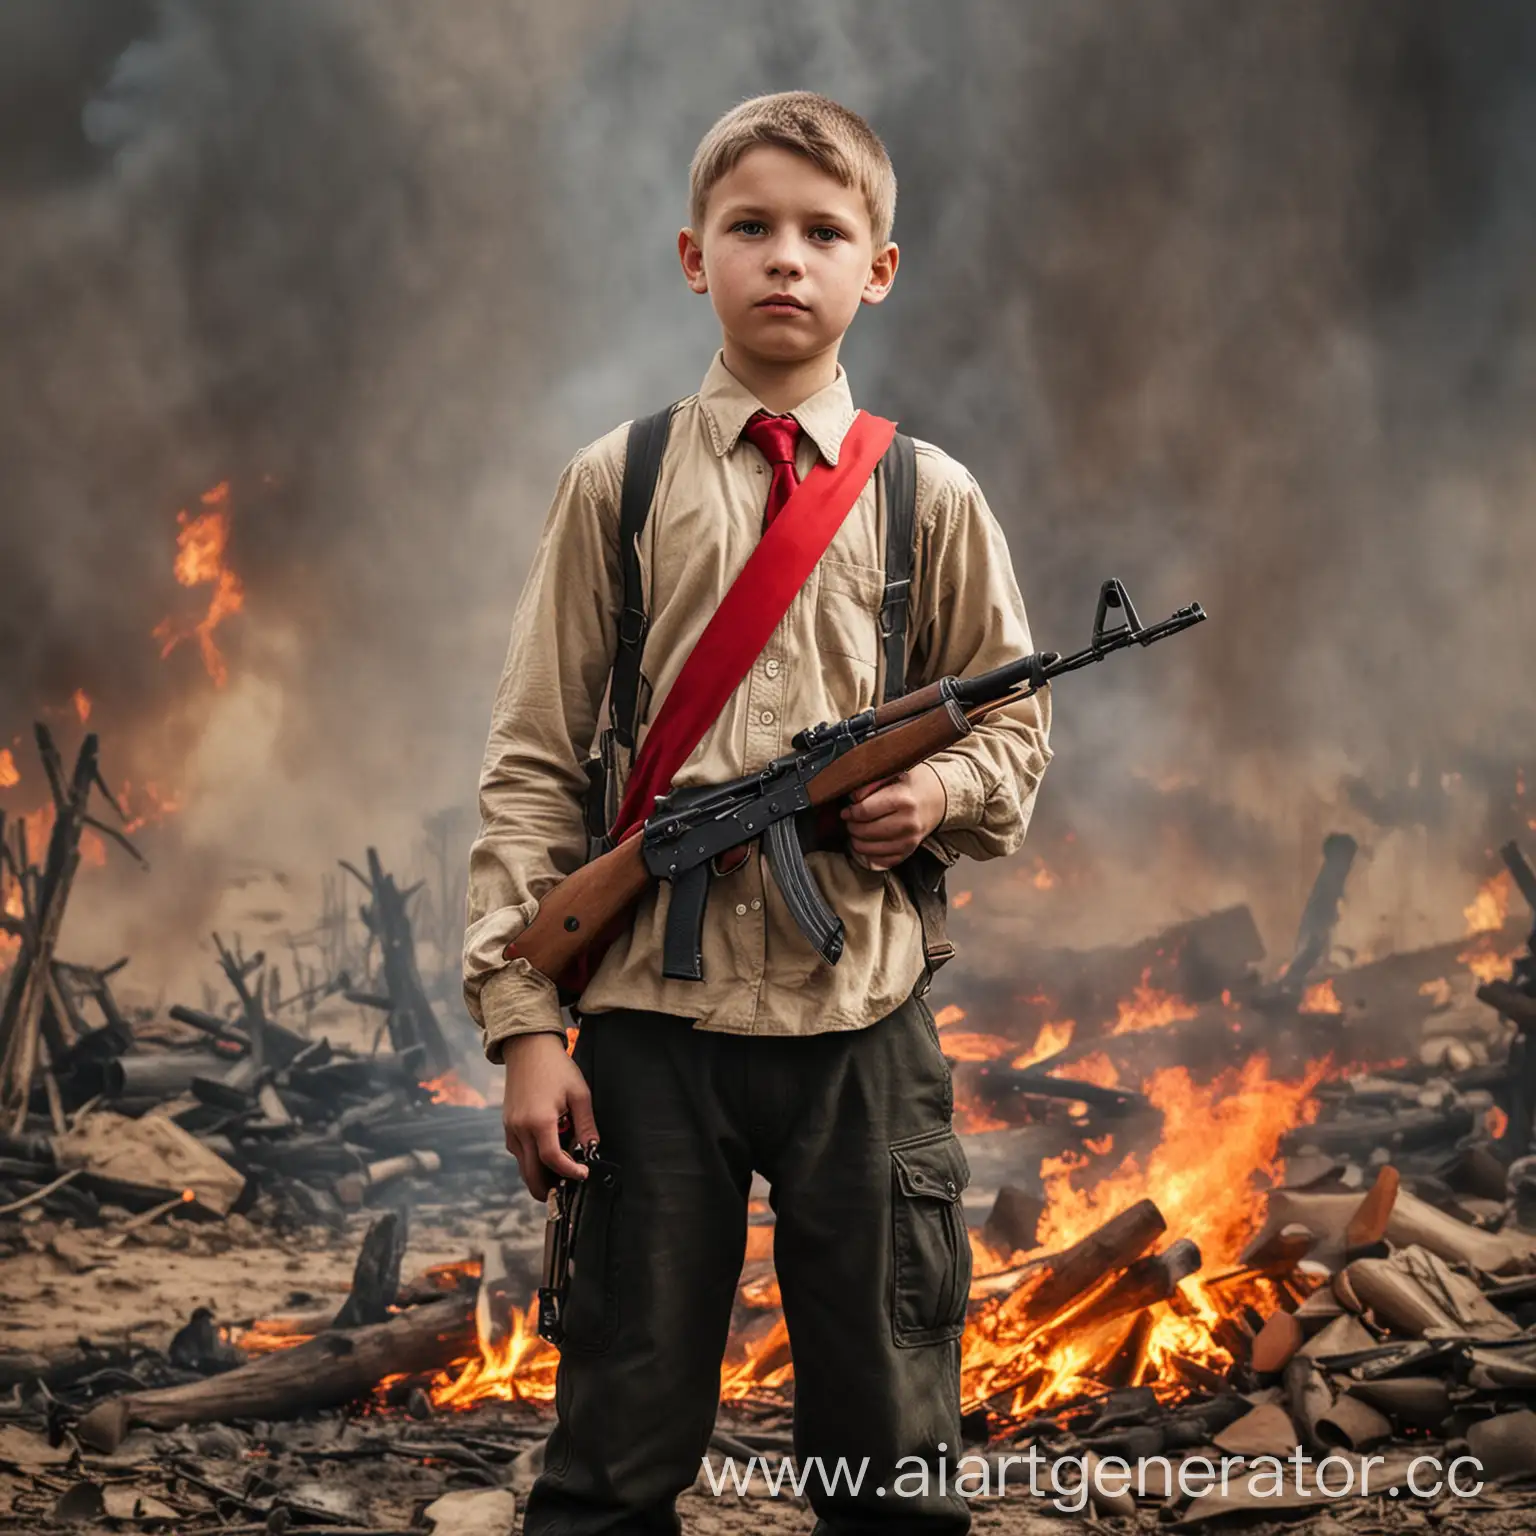 Young-Pioneer-with-AK47-on-War-Background-Amid-Burning-Ukrainian-Flag